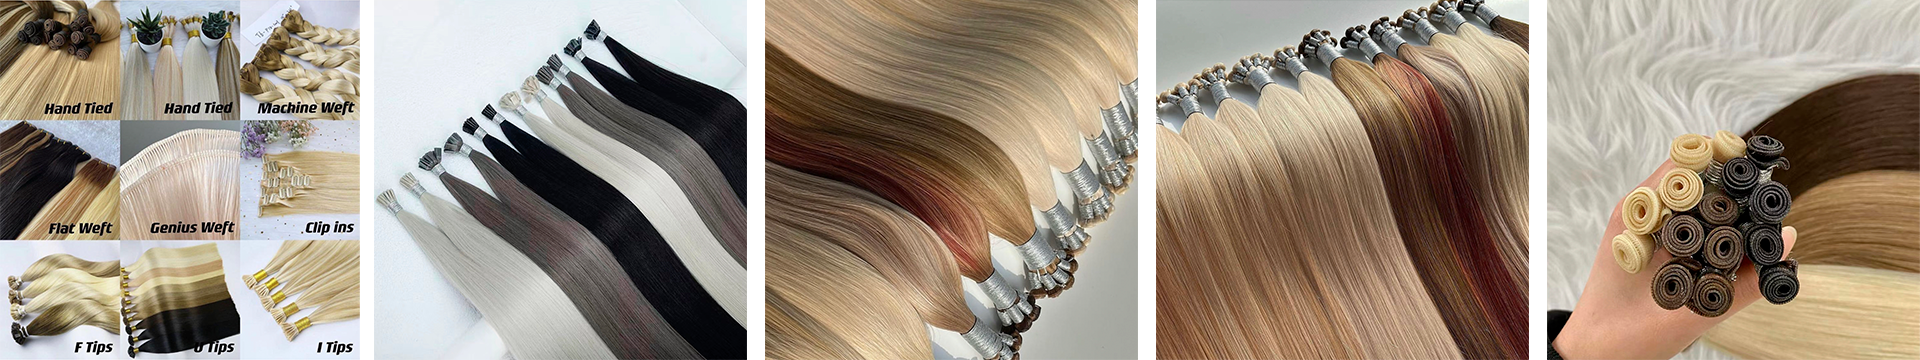 clip in hair extensions wholesale, clip in hair extensions manufacturers, custom made clip in hair extensions, russian hair clip in extensions, clip in highlights human hair